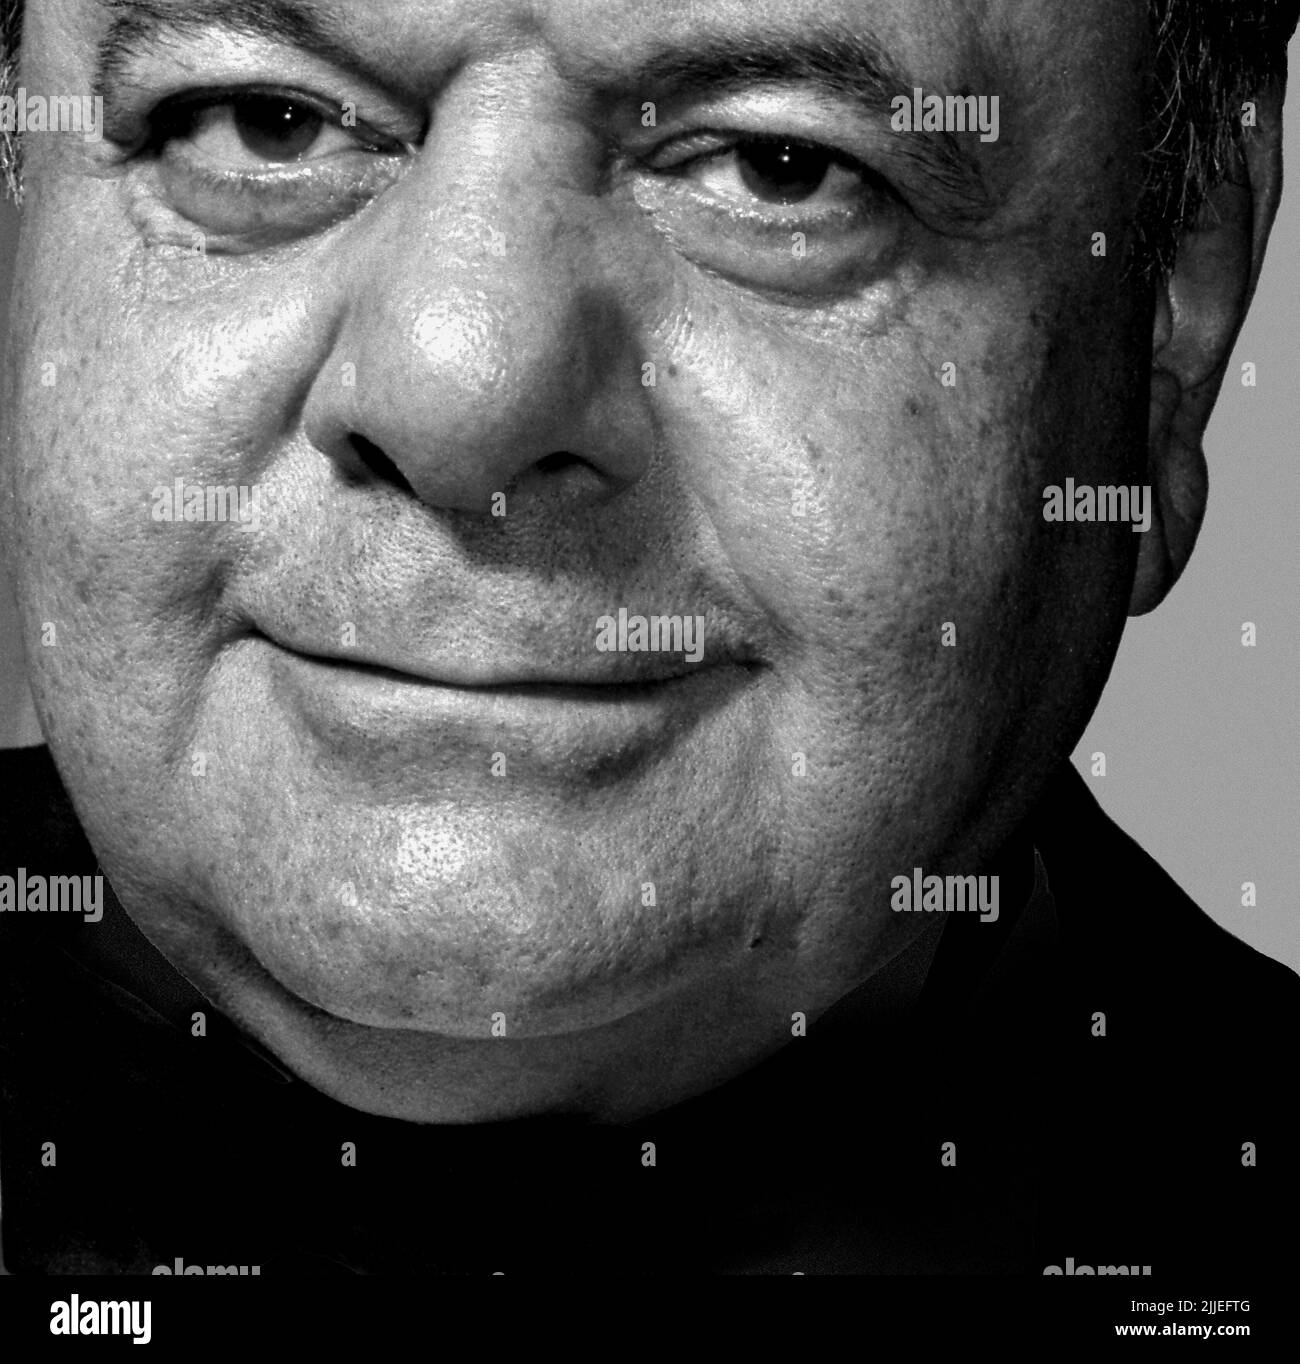 PAUL SORVINO (April 13, 1939 - July 25, 2022) was an American actor, opera singer, businessman, writer, and sculptor. He often portrayed authority figures on both sides of the law and was known for his roles in the 1990 gangster film 'Goodfellas', and the TV series 'Law & Order'. FILE PHOTO: Miami, U.S.: Portrait of actor PAUL SORVINO (exact date unknown) (Credit Image: © David Jacobs/ZUMA Press) Stock Photo